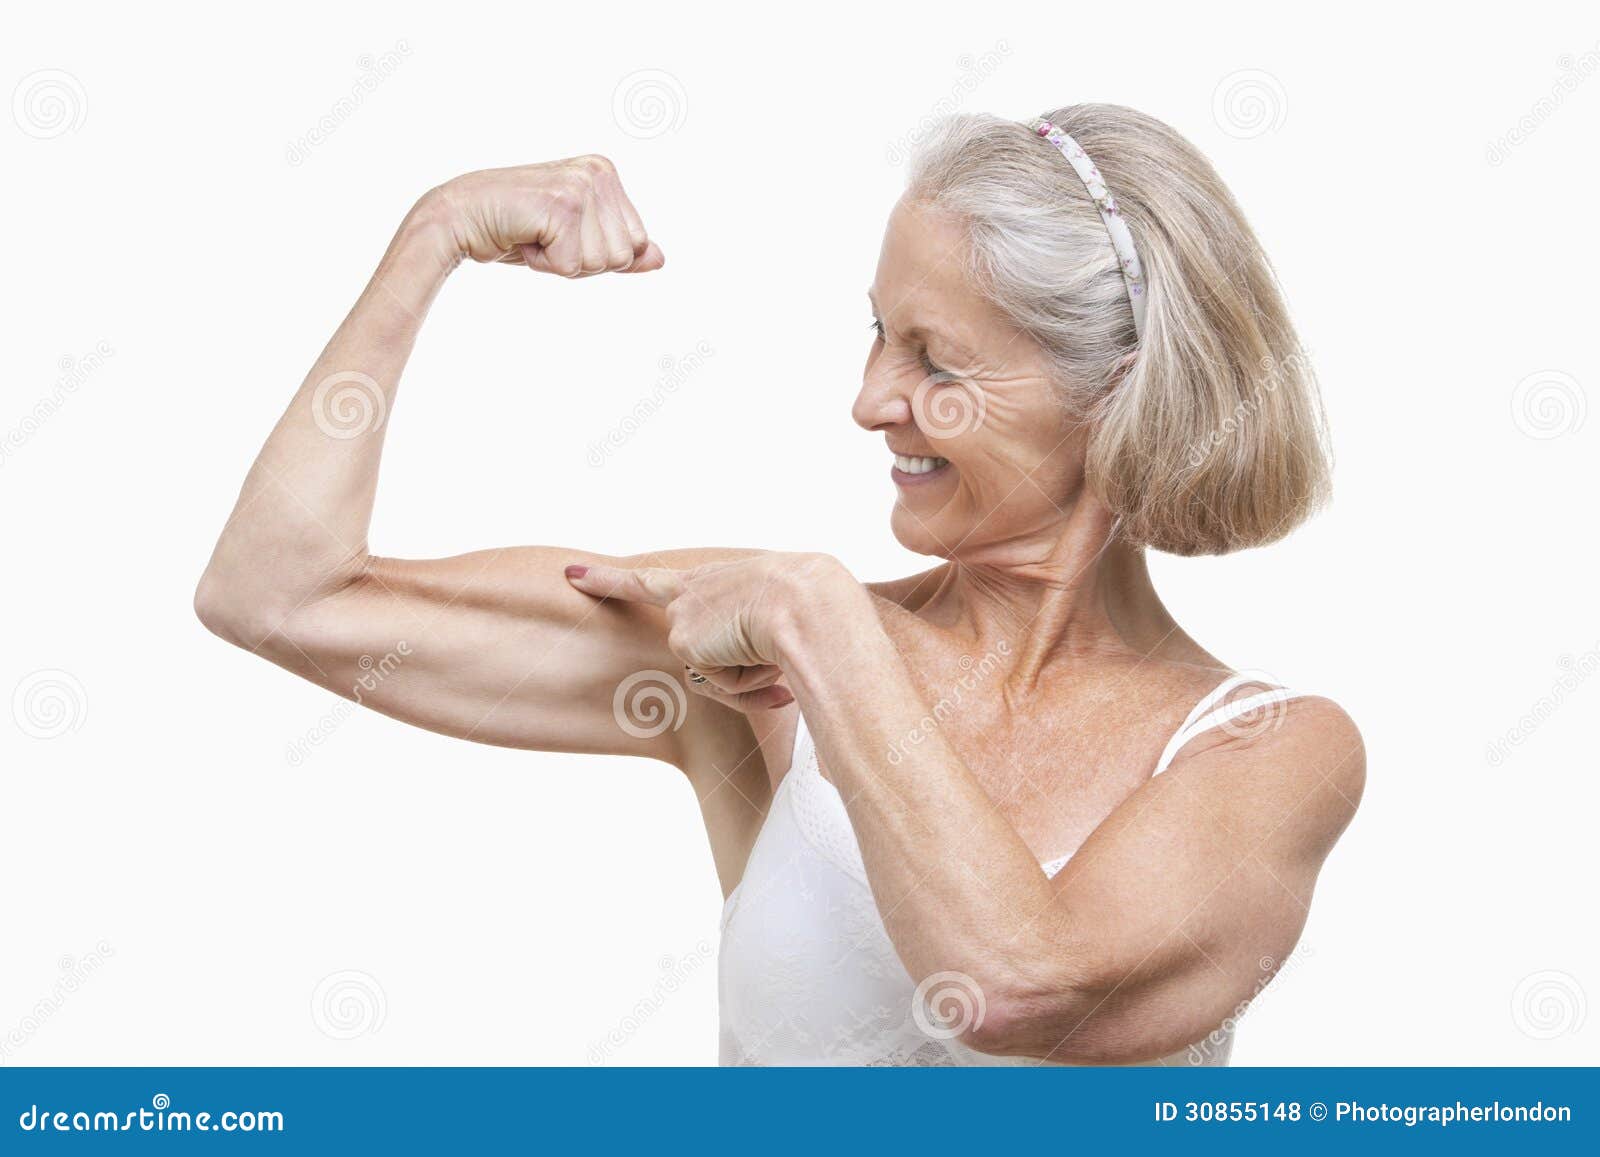 Muscles Lady 116